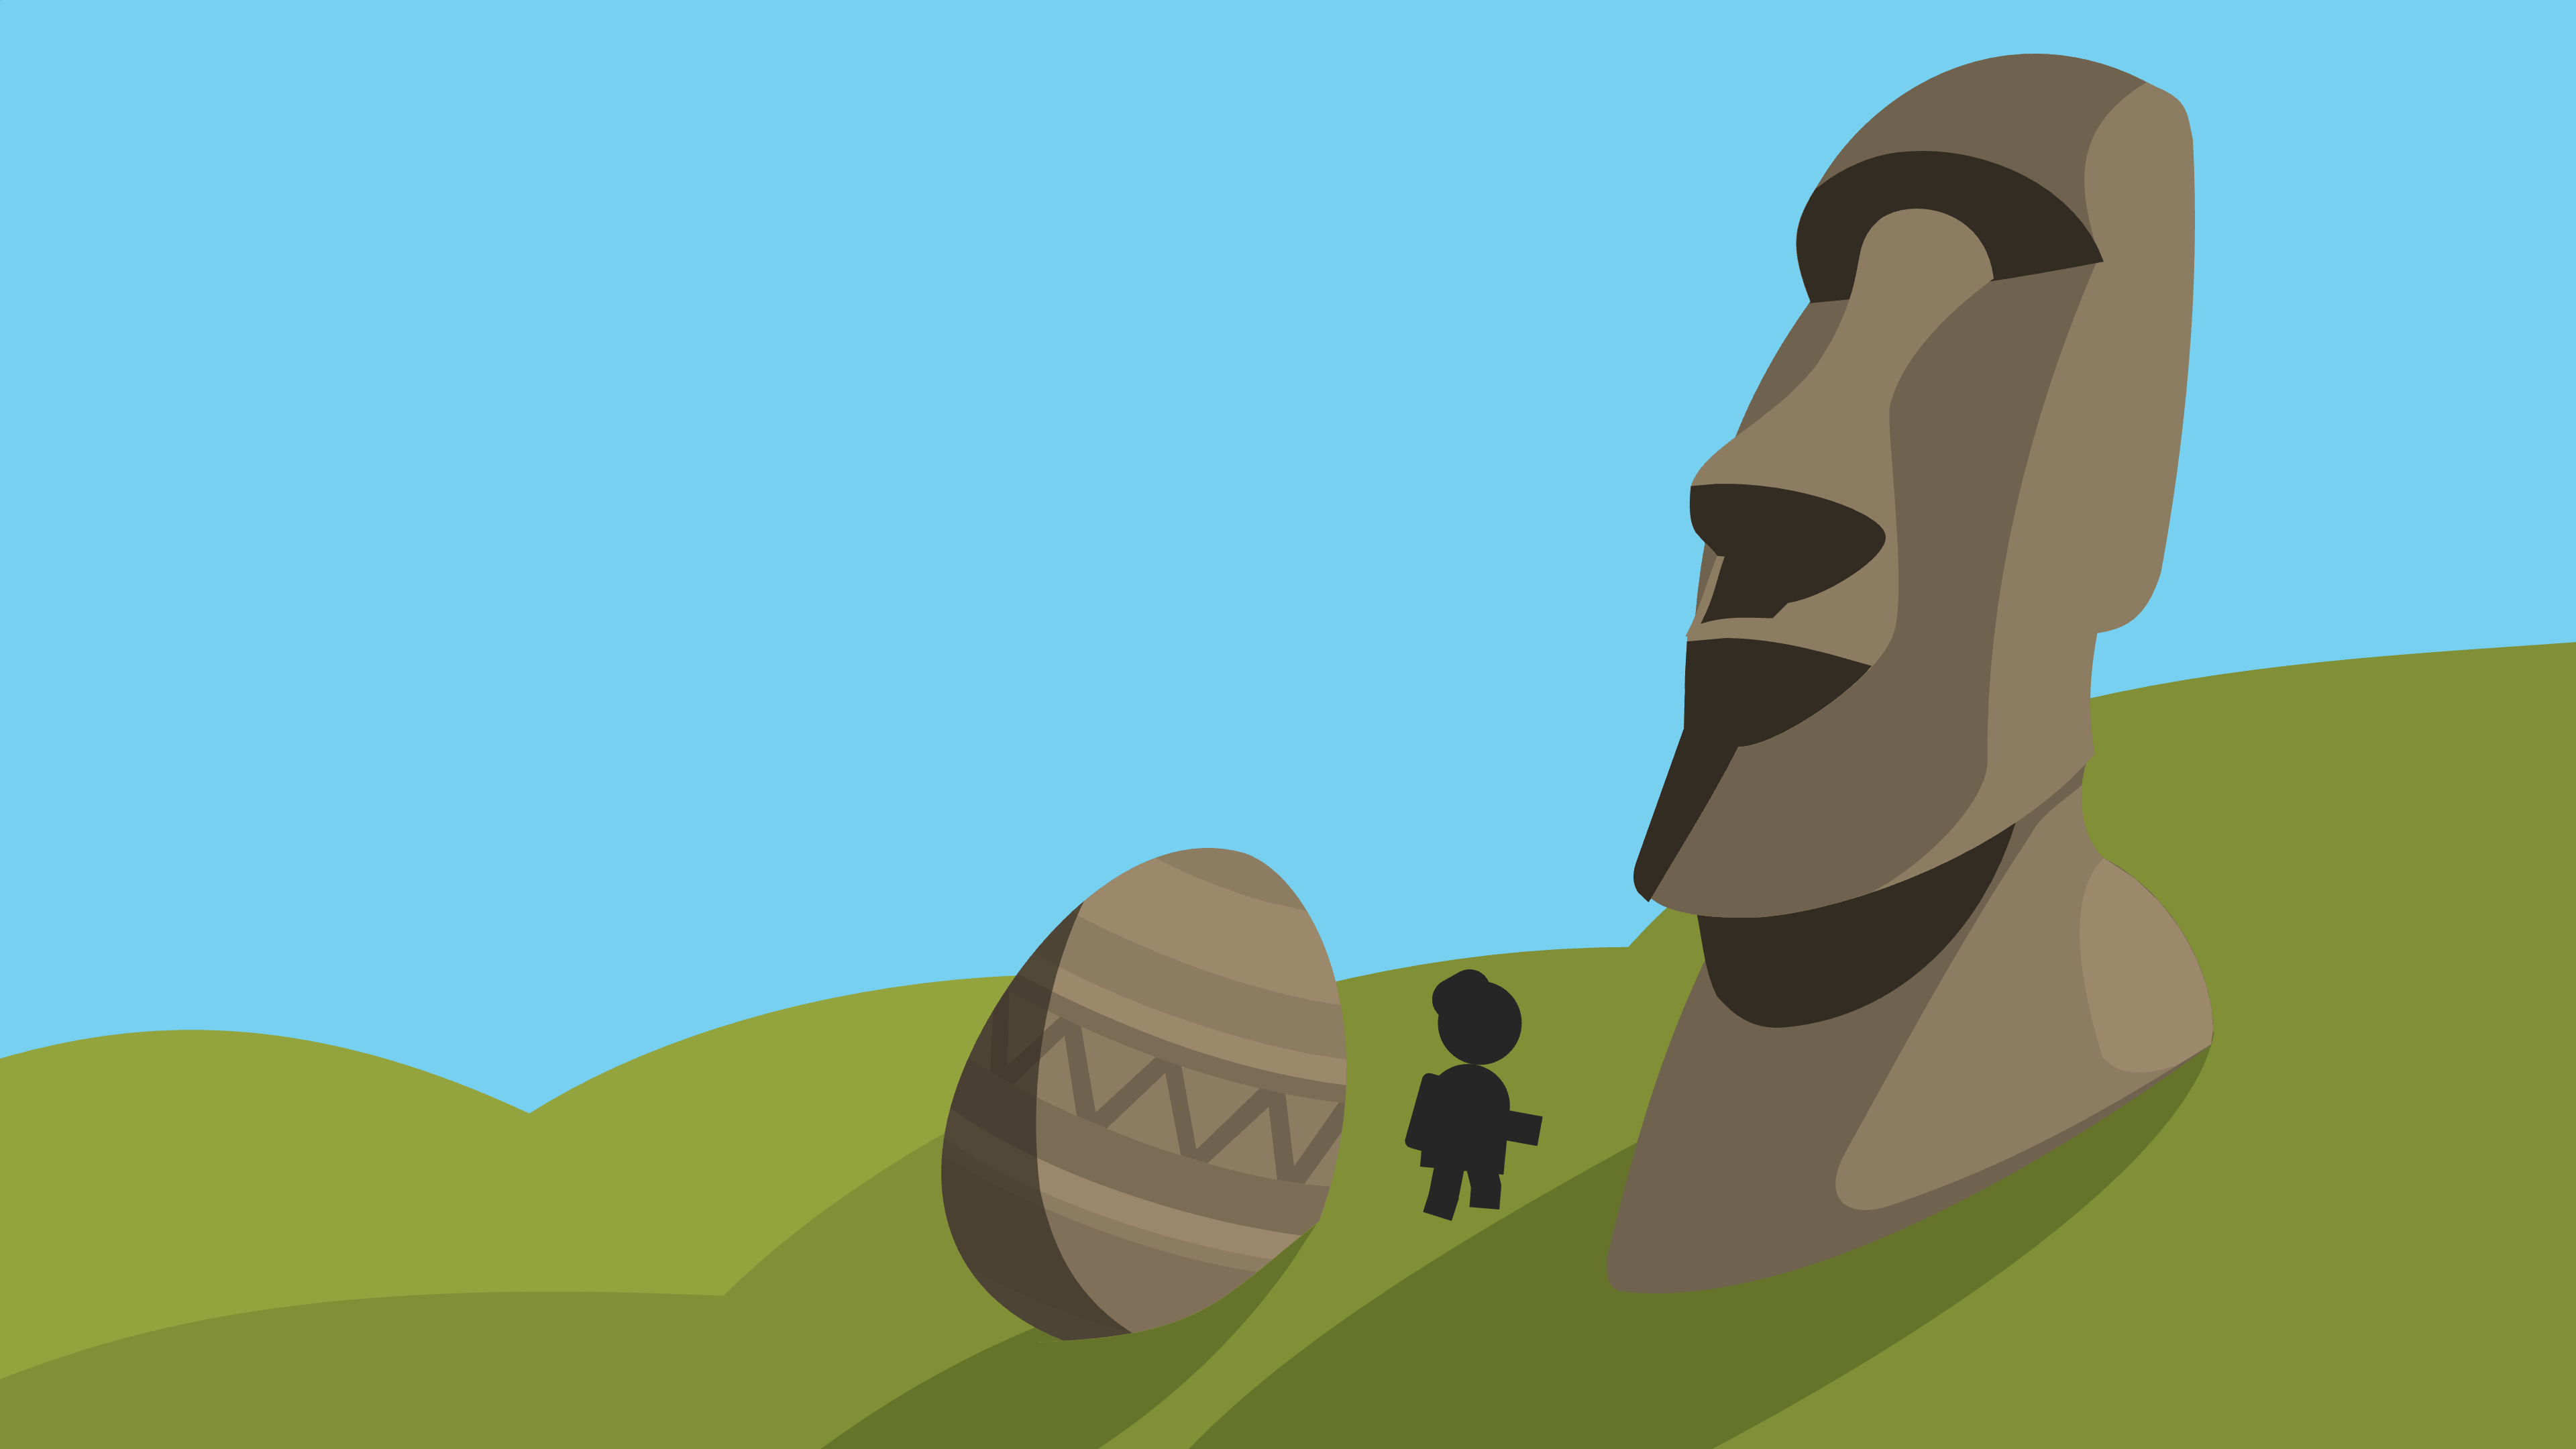 A moai on Easter Island with a gigantic egg lying next to it